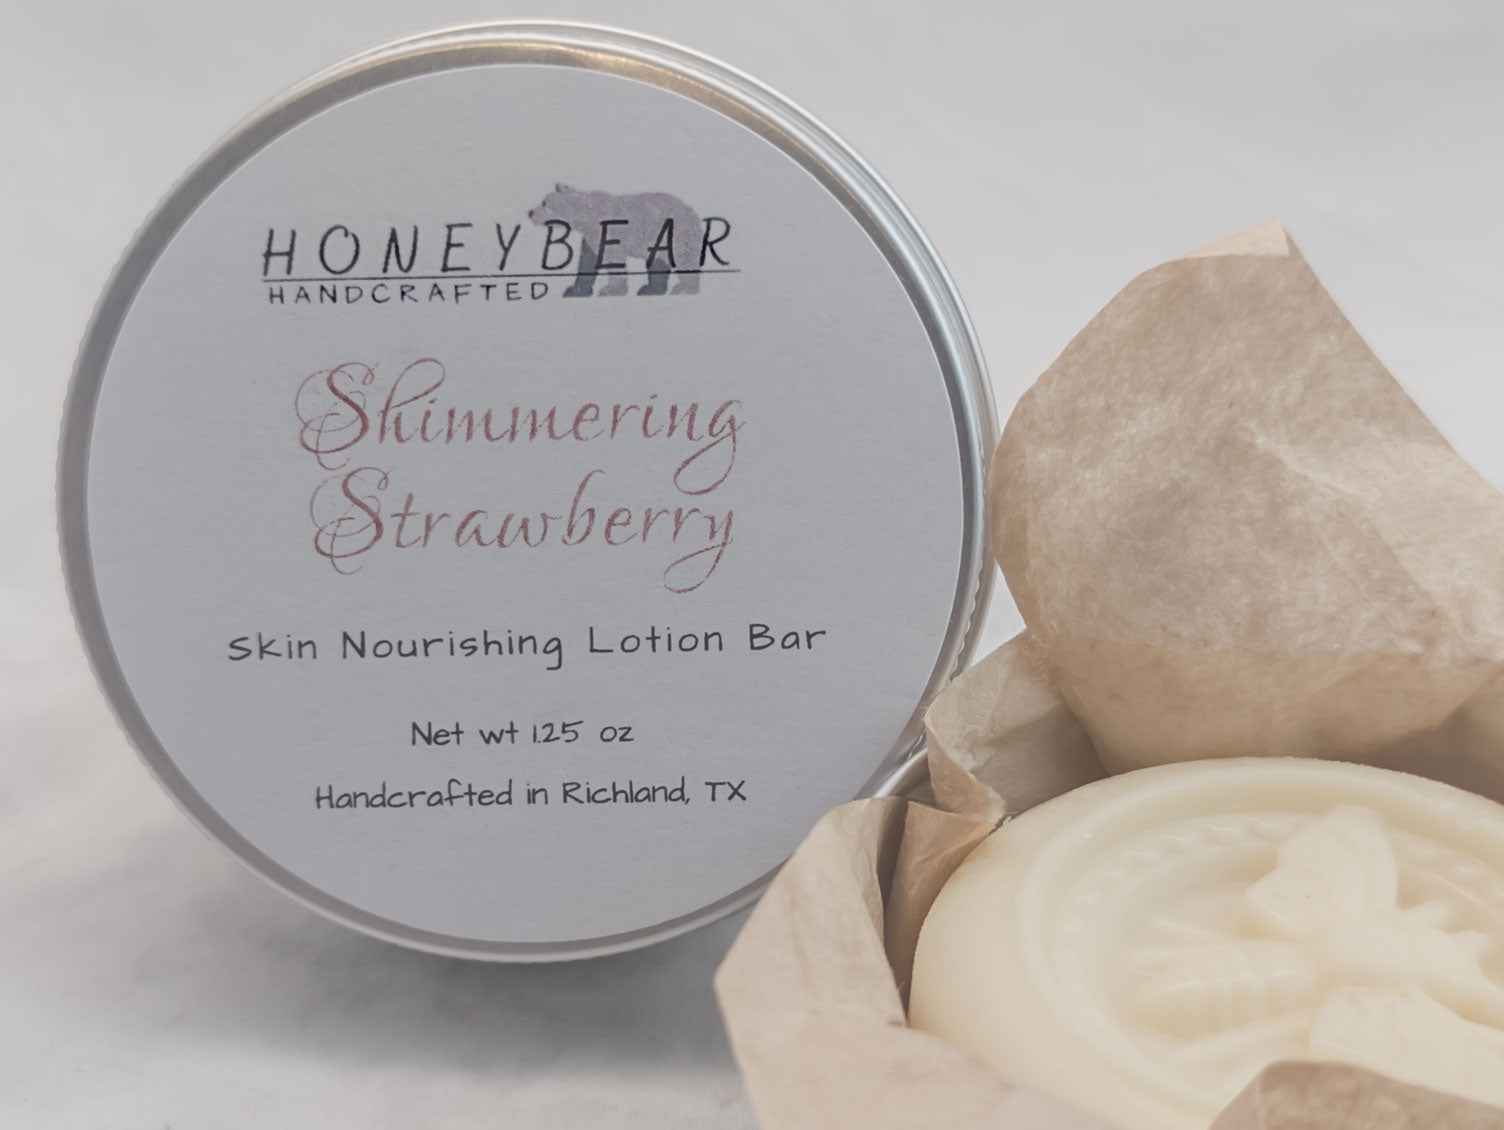 Shimmering Strawberry lotion bar in a silver tin on white background. Luxurious skin nourishing lotion bar. Romantic scent. With open lotion bar near the side of the labeled lotion bar